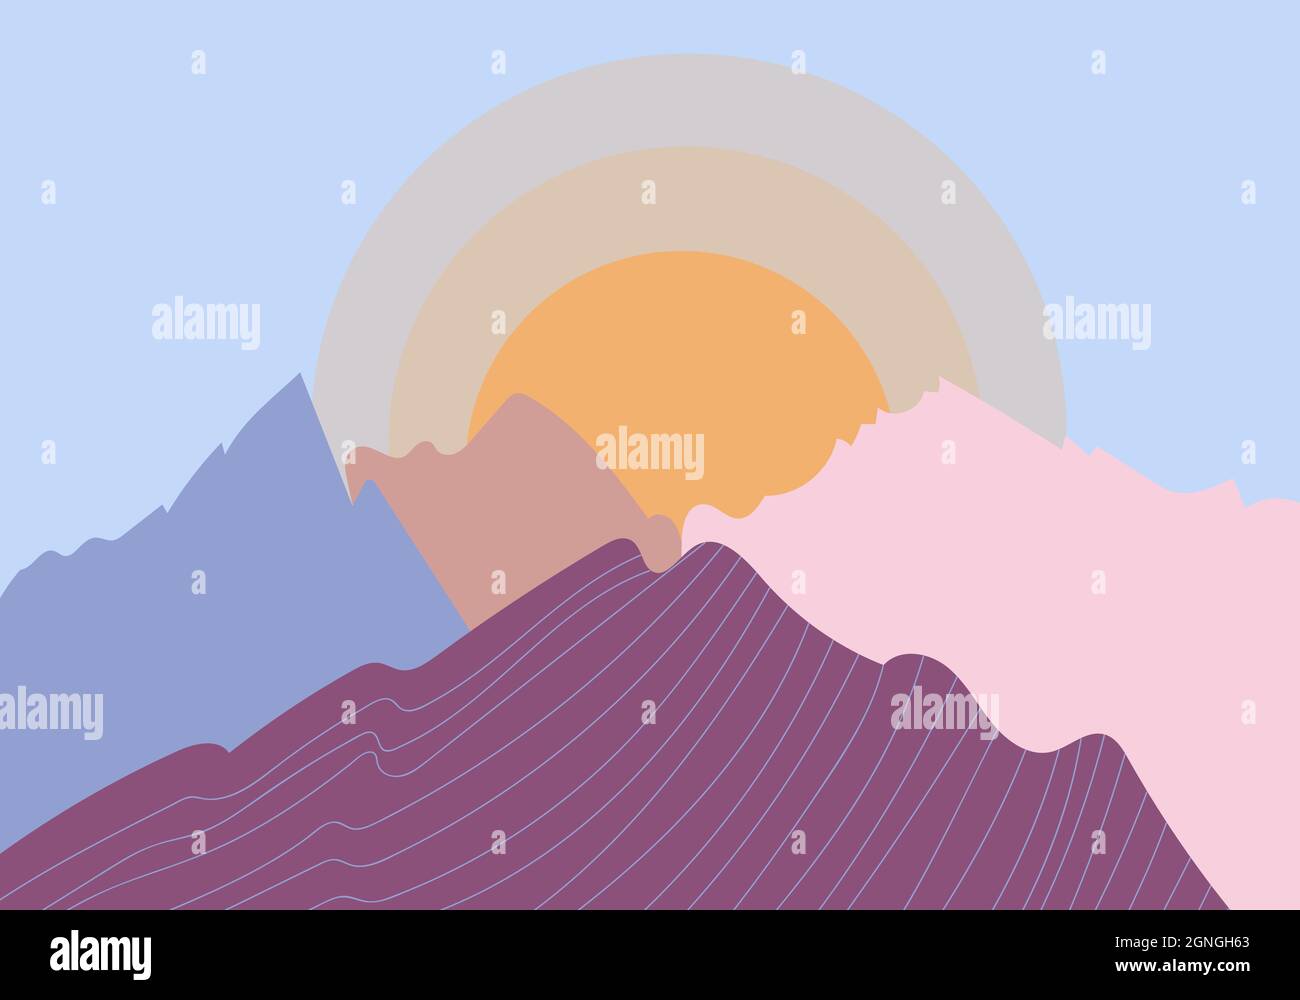 Vector illustration of a mountain landscape at sunrise in a minimalist style. Stock Vector